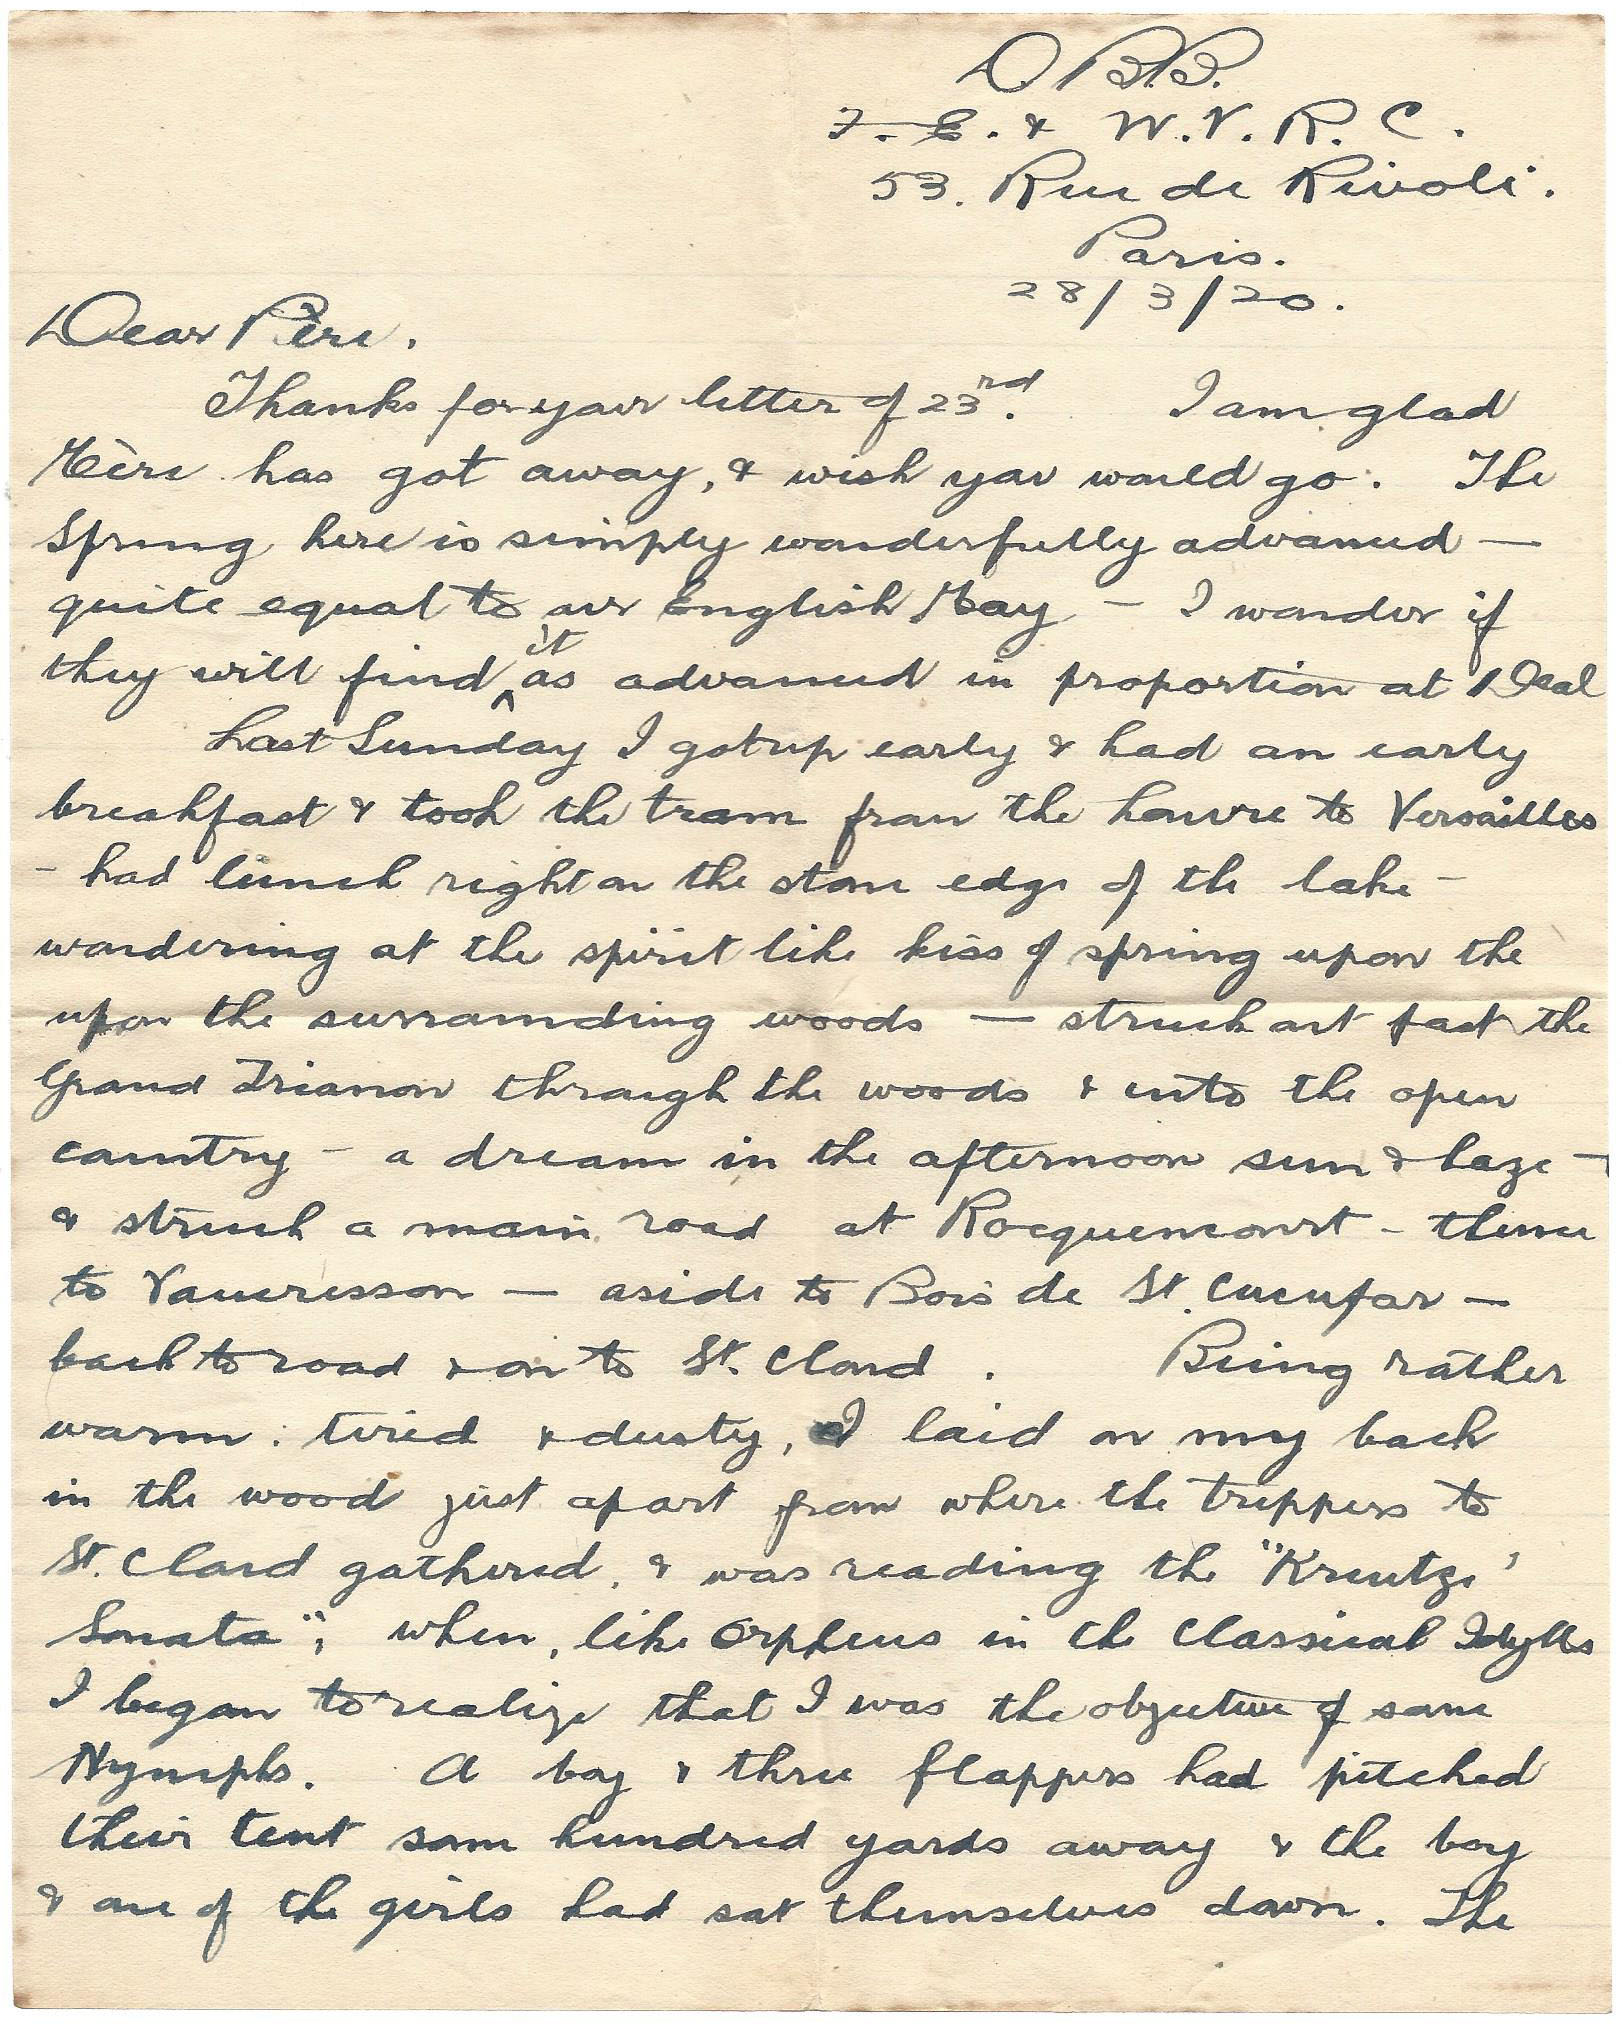 Spring in Paris 1920 page 1 - letter from Donald Bearman to father Thomas dated 28th March 